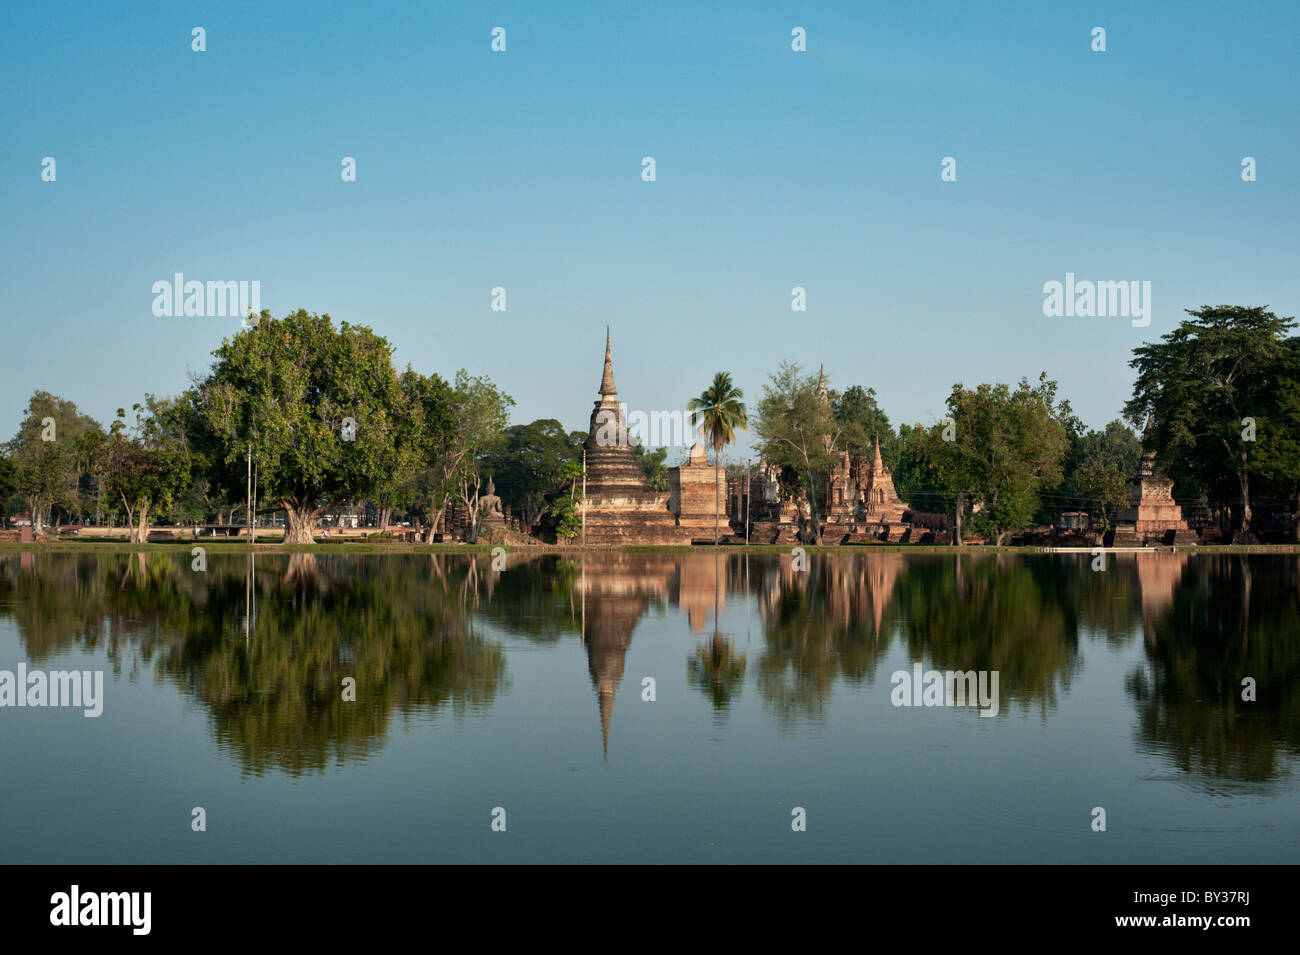 Reflection of ruins at the UNESCO World Hertitage Site in Sukothai, Thailand, Asia. Stock Photo